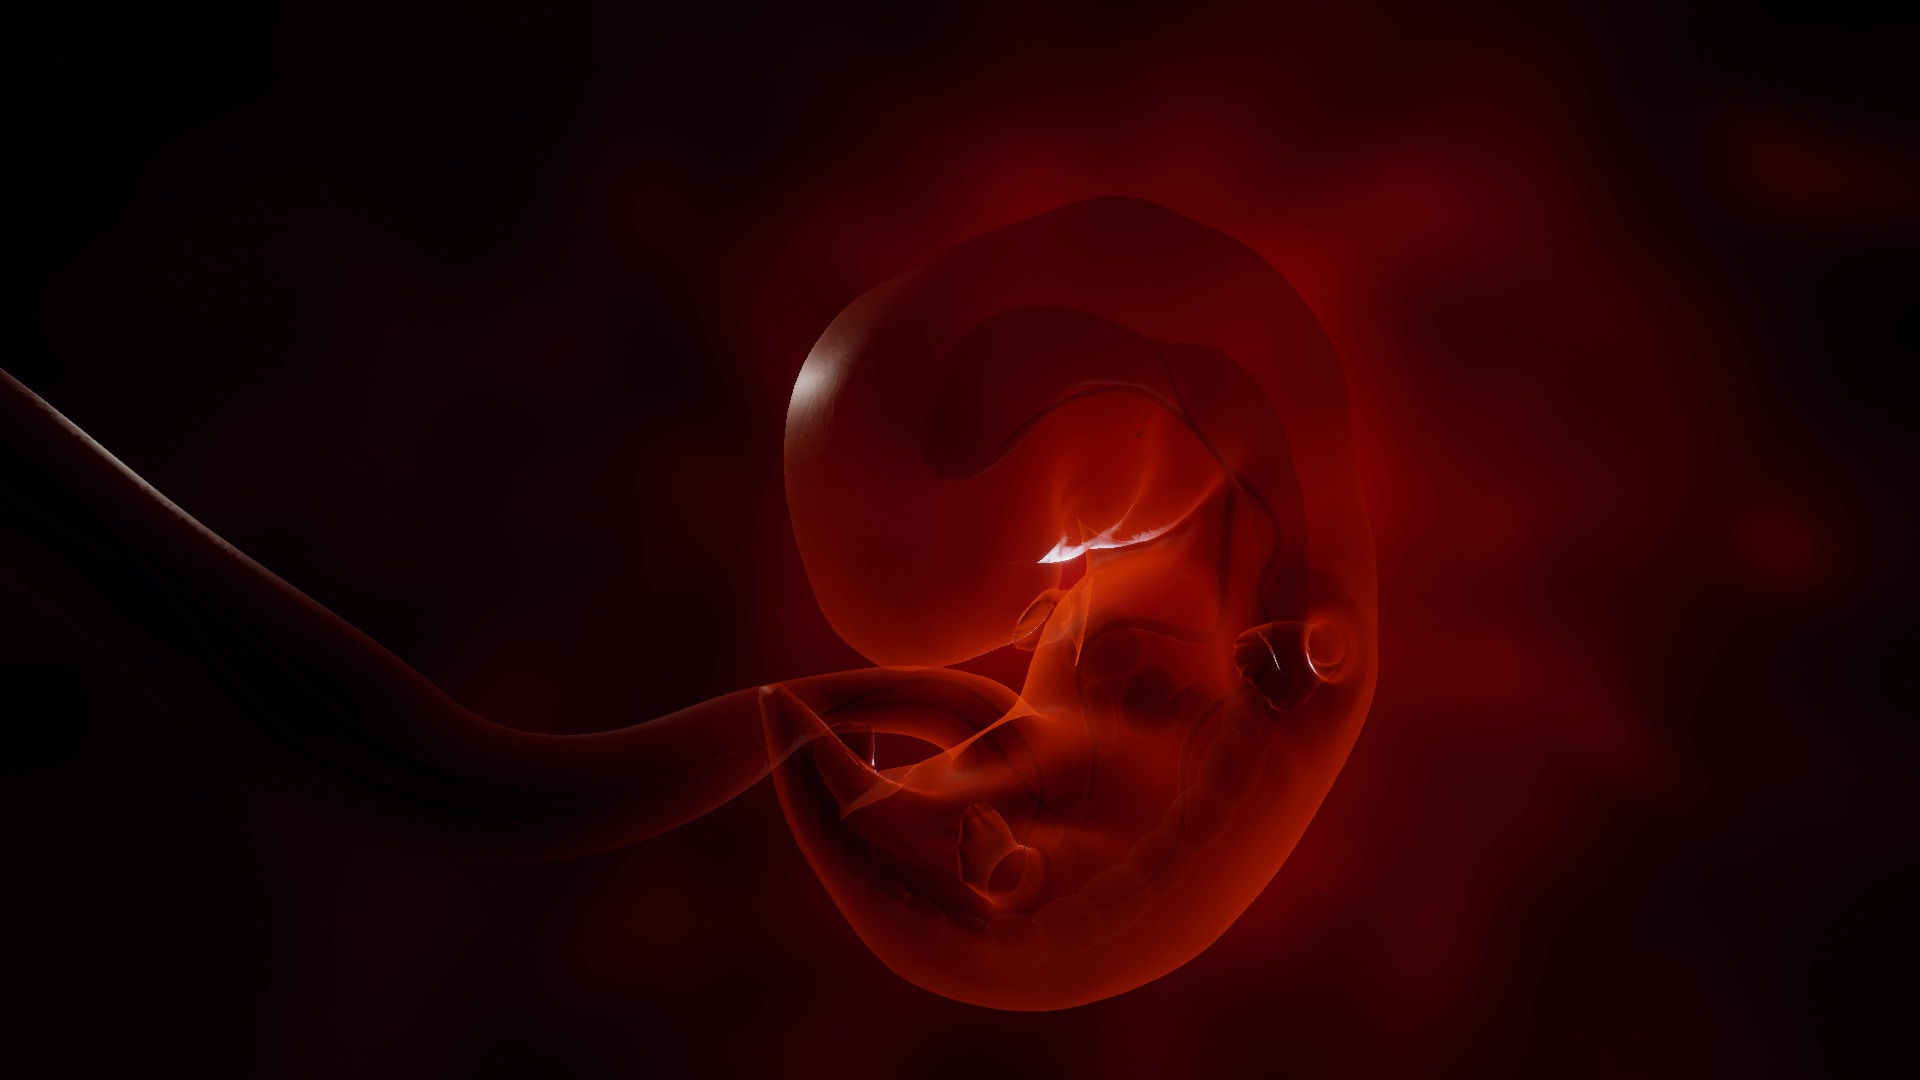 Human embryo animation of development in Environments